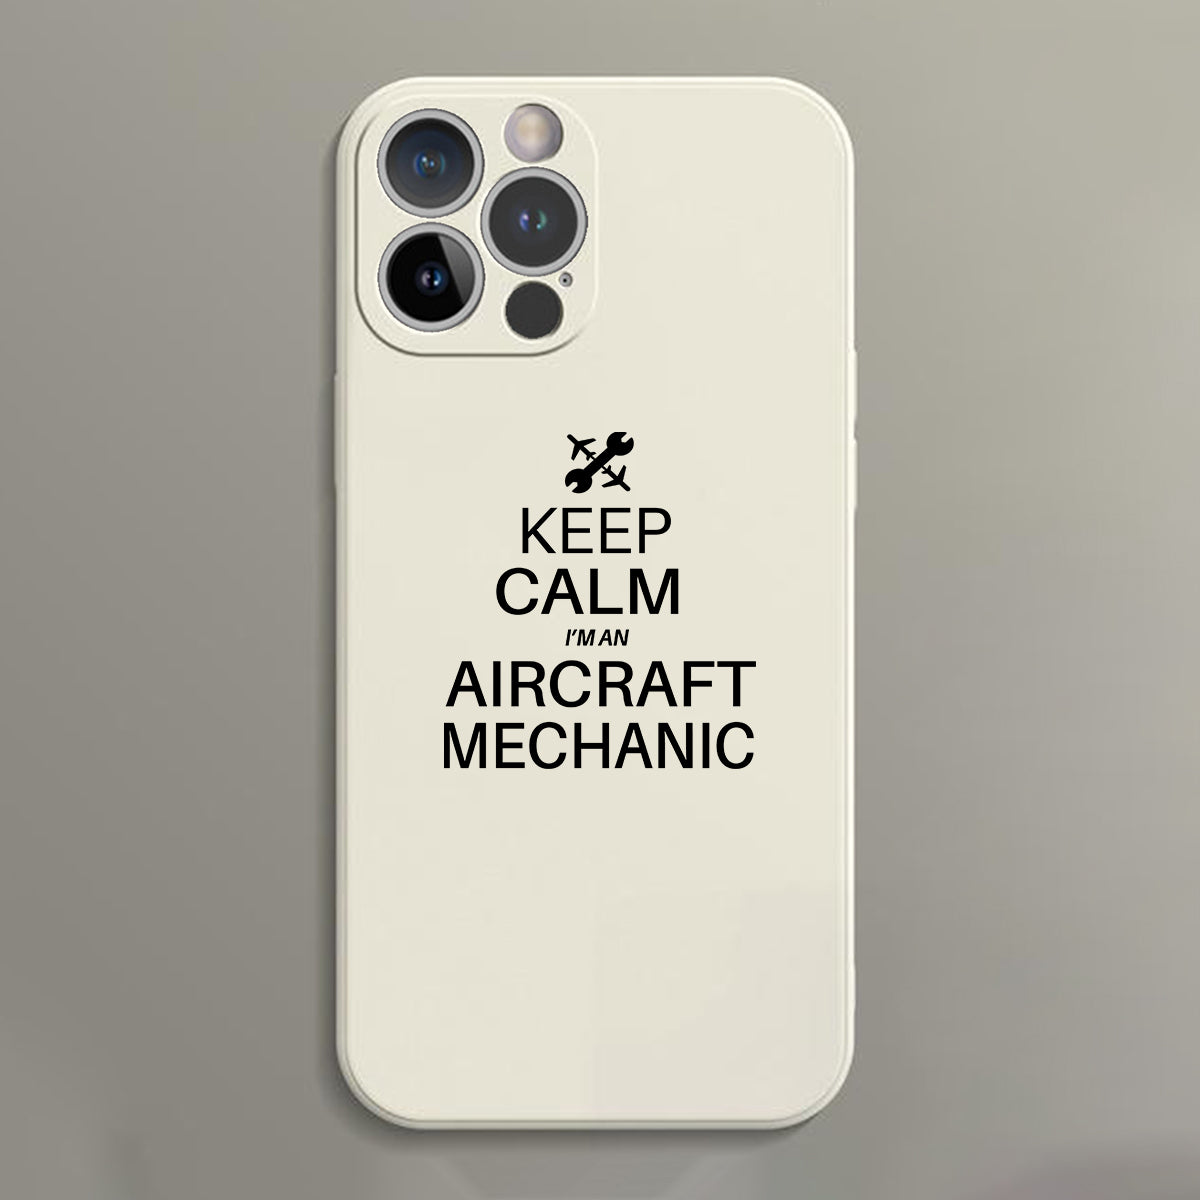 Aircraft Mechanic Designed Soft Silicone iPhone Cases